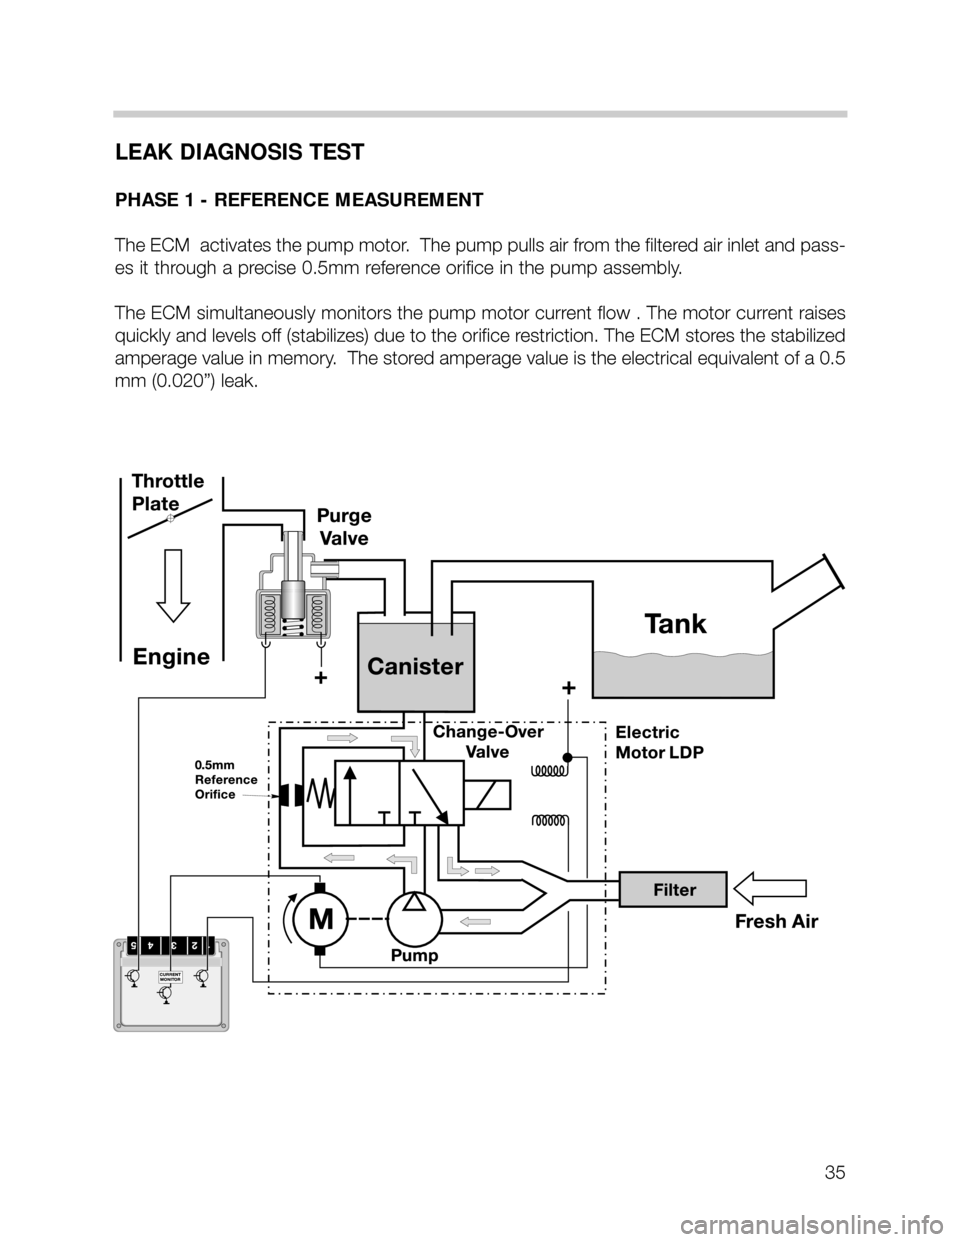 BMW X5 1999 E53 M62TU Engine Owners Guide LEAK DIAGNOSIS TEST
PHASE 1 - REFERENCE MEASUREMENT
The ECM  activates the pump motor.  The pump pulls air from the filtered air inlet and pass-
es it through a precise 0.5mm reference orifice in the 